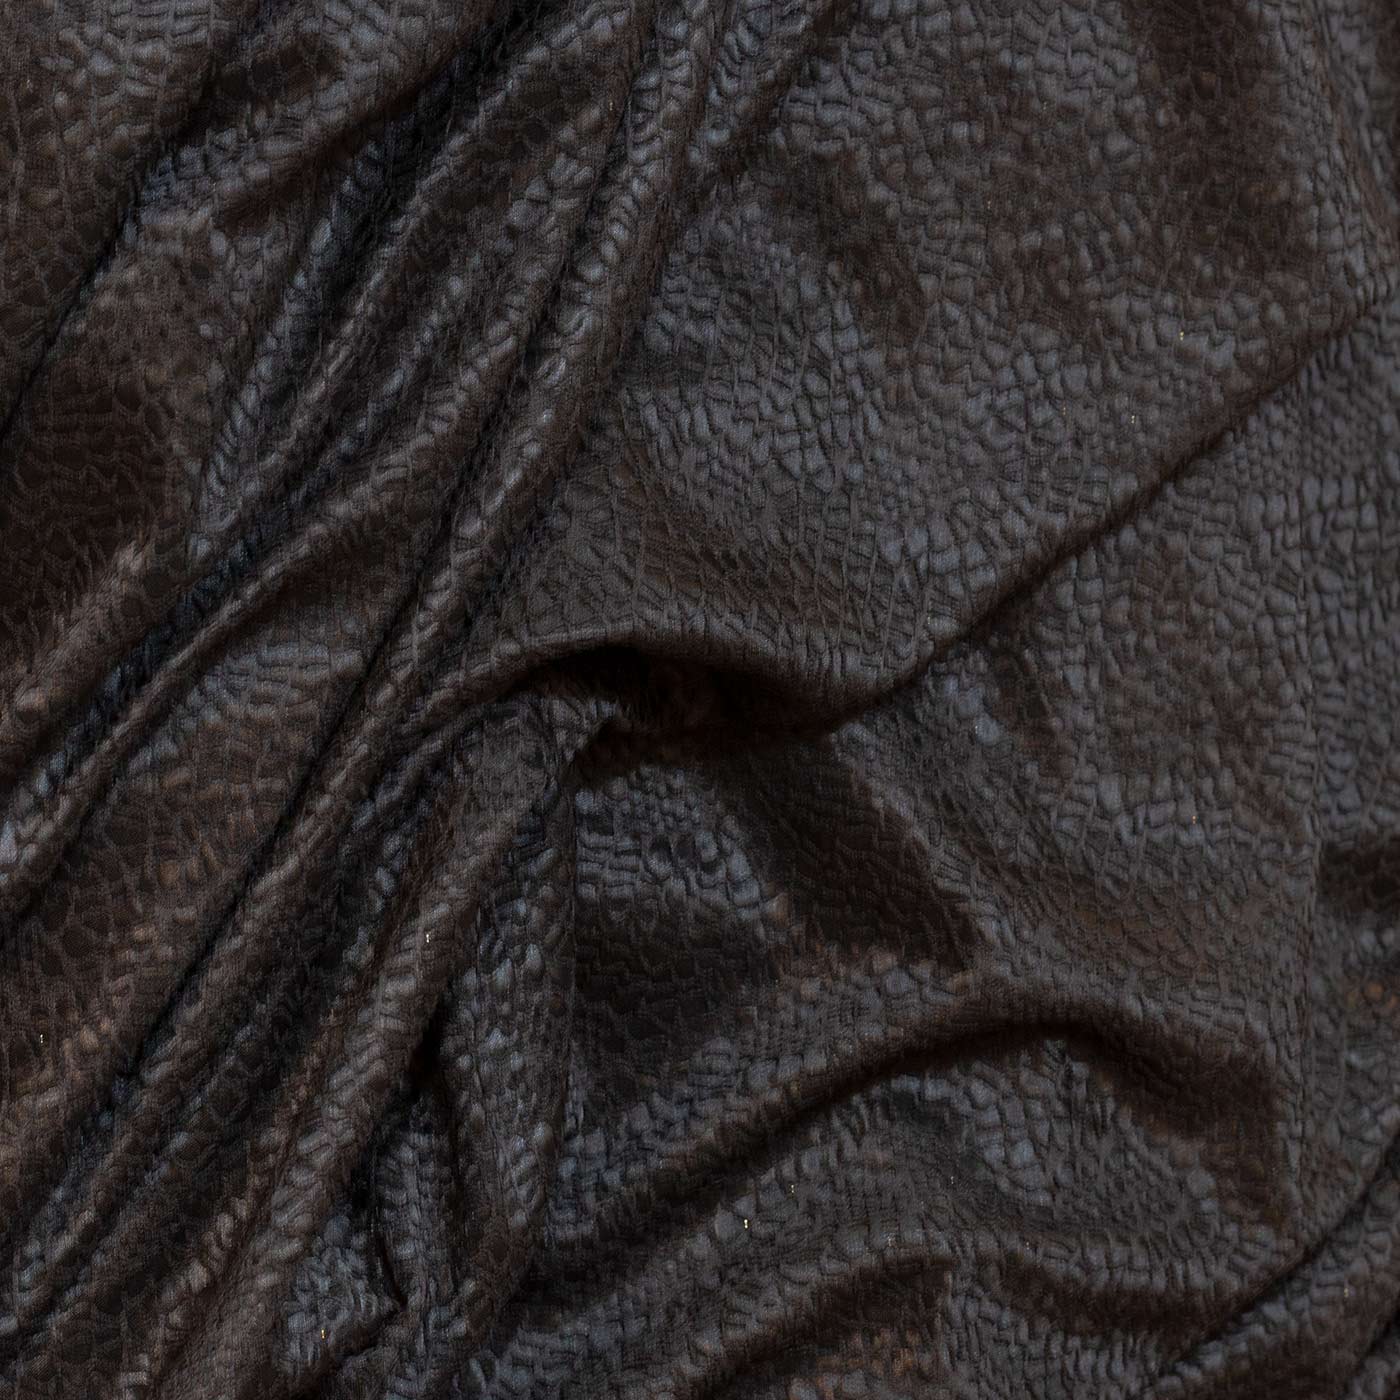 Black Netting Embroidered Fabric